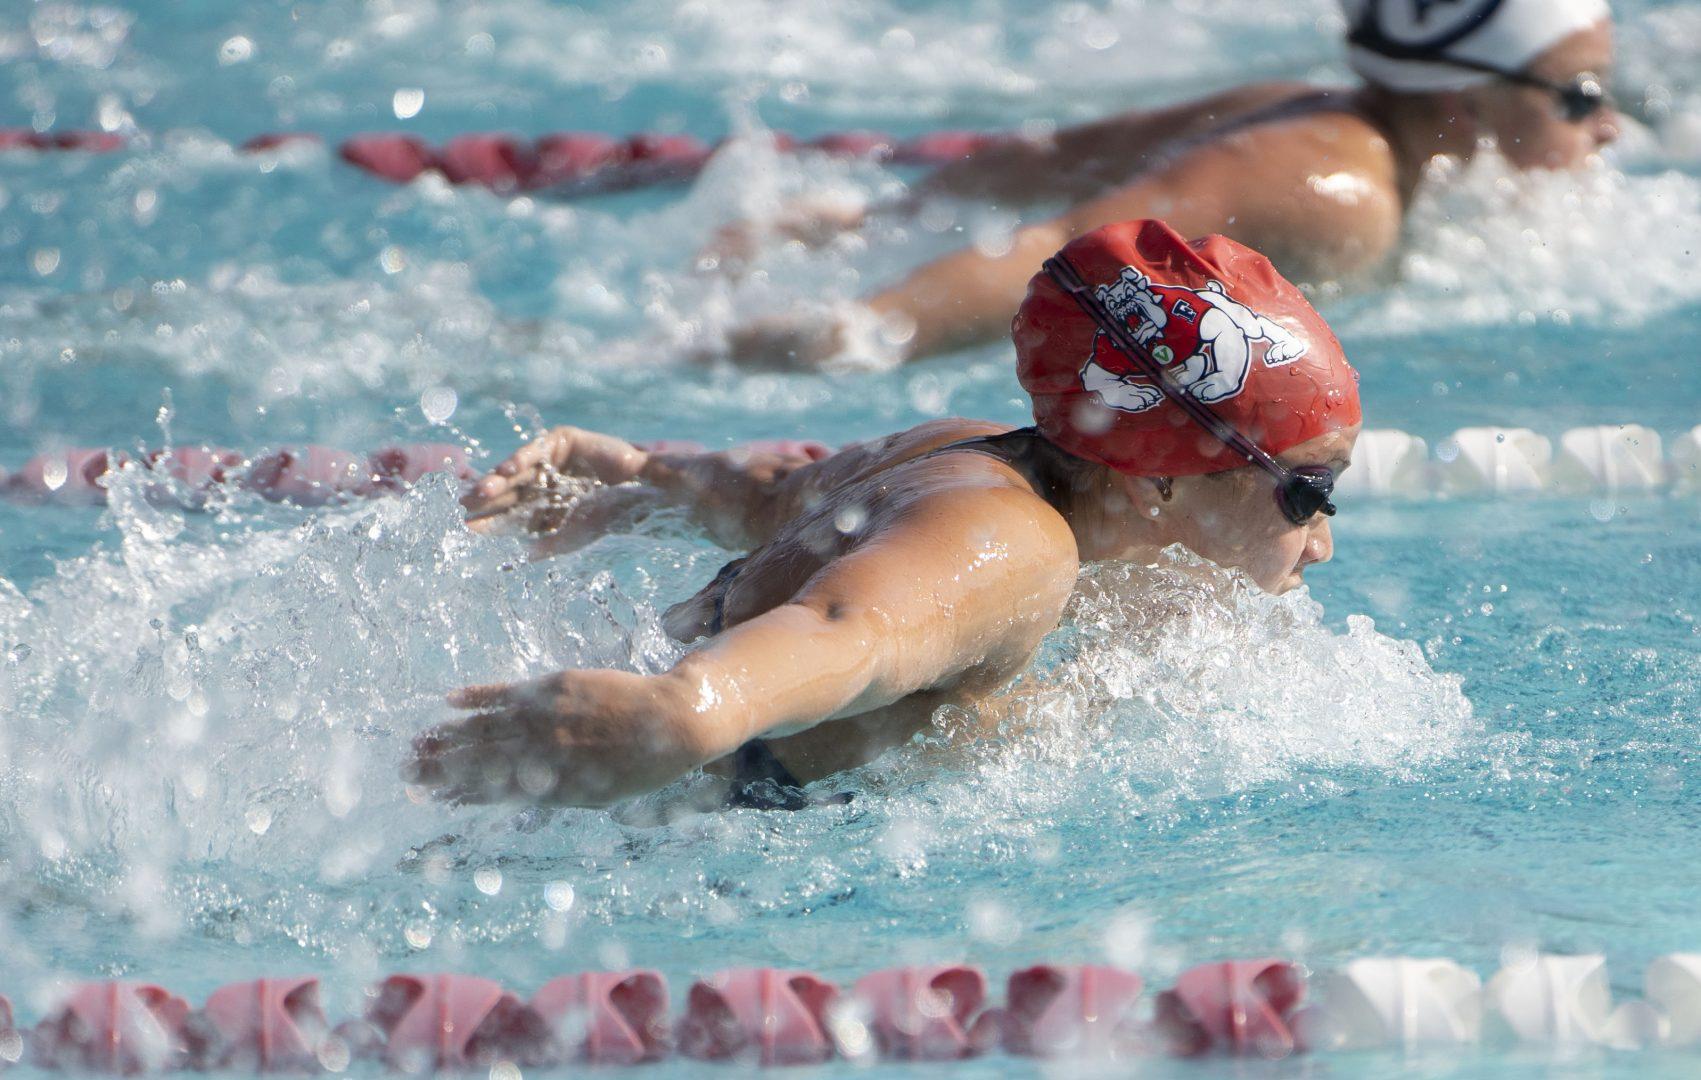 Katie+Ueda+swims+the+200+fly+in+Fresno+State+womens+swimming+and+diving+senior+day+against+UC+Davis+at+the+Fresno+State+Aquatics+center+Saturday+Jan.+22%2C+2022.+%28Wyatt+Bible%2F+The+Collegian%29